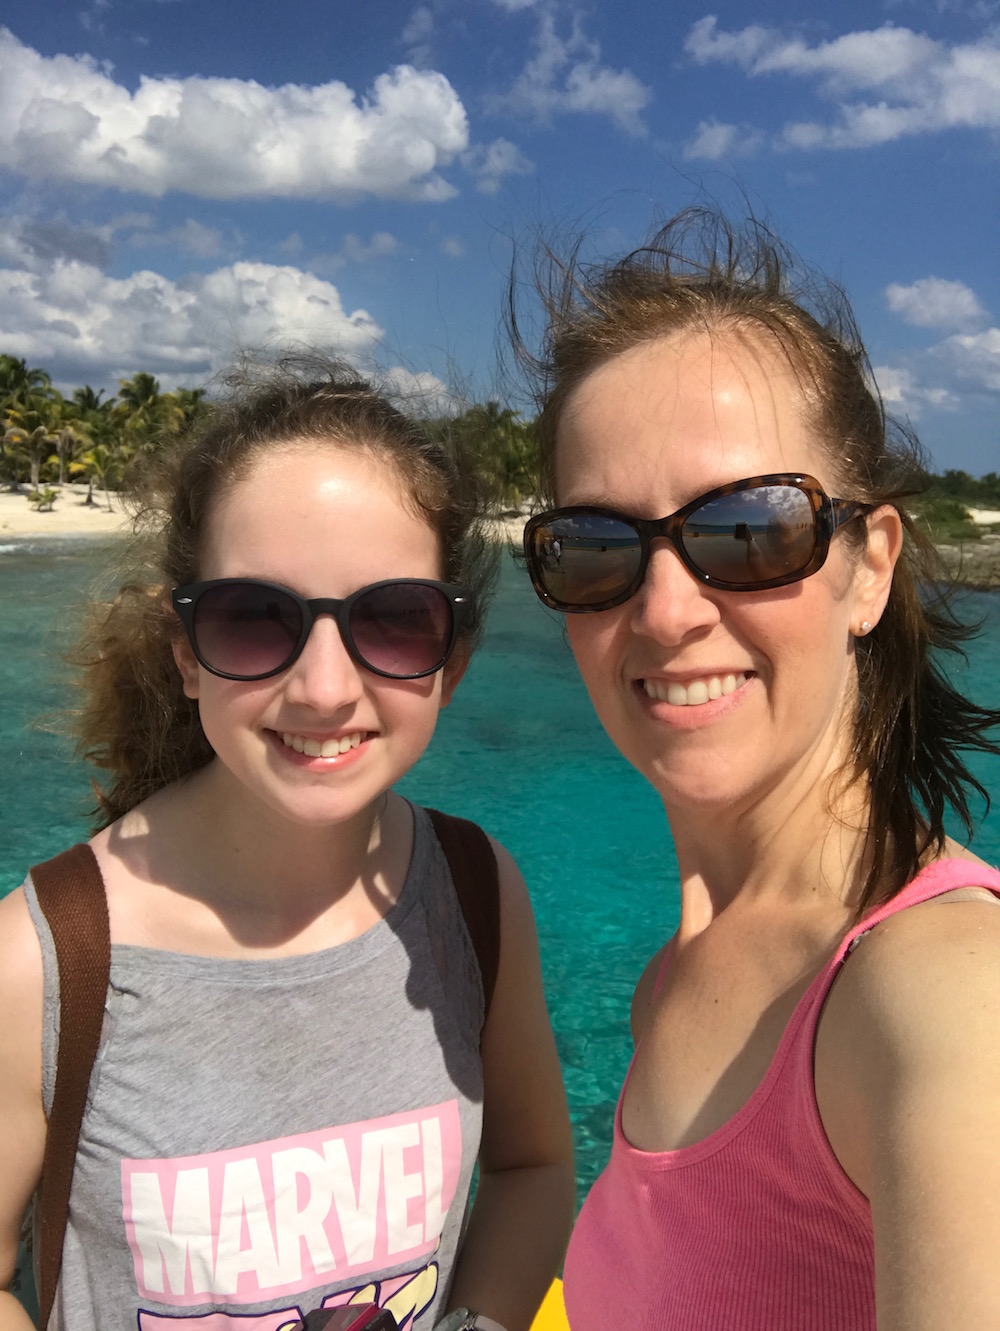 Heading to the Costa Maya Port with Carnival Cruise Lines? It's a beautiful destination with plenty of areas to explore and excursions for families.